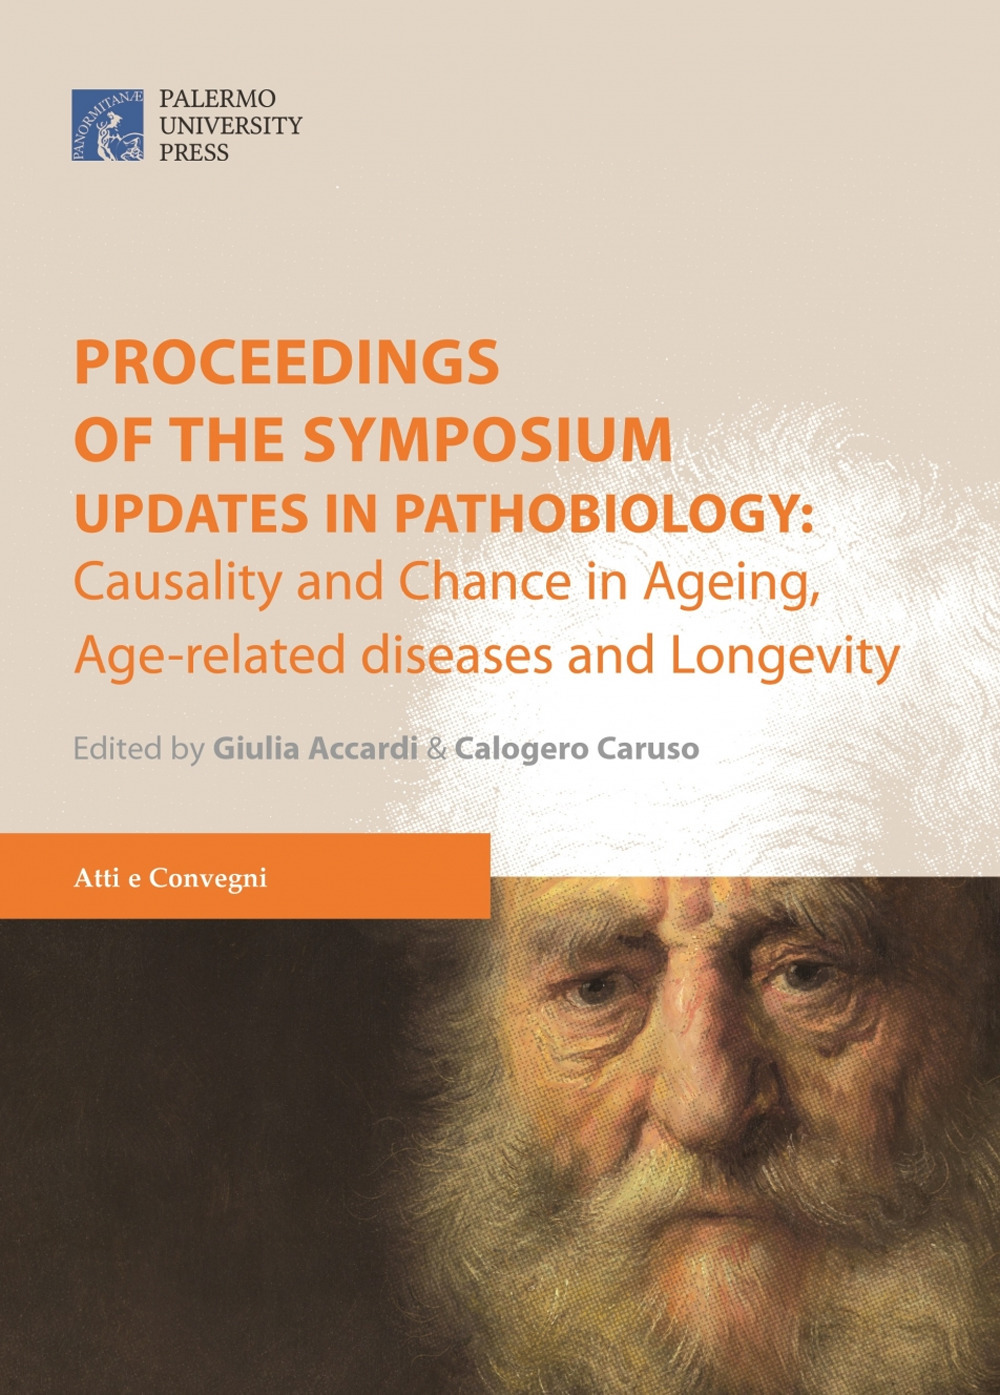 Proceedings of the symposium. «Updates in pathobiology: causality and chance in ageing, age-related diseases and longevity» (Palermo, 24 marzo 2017)